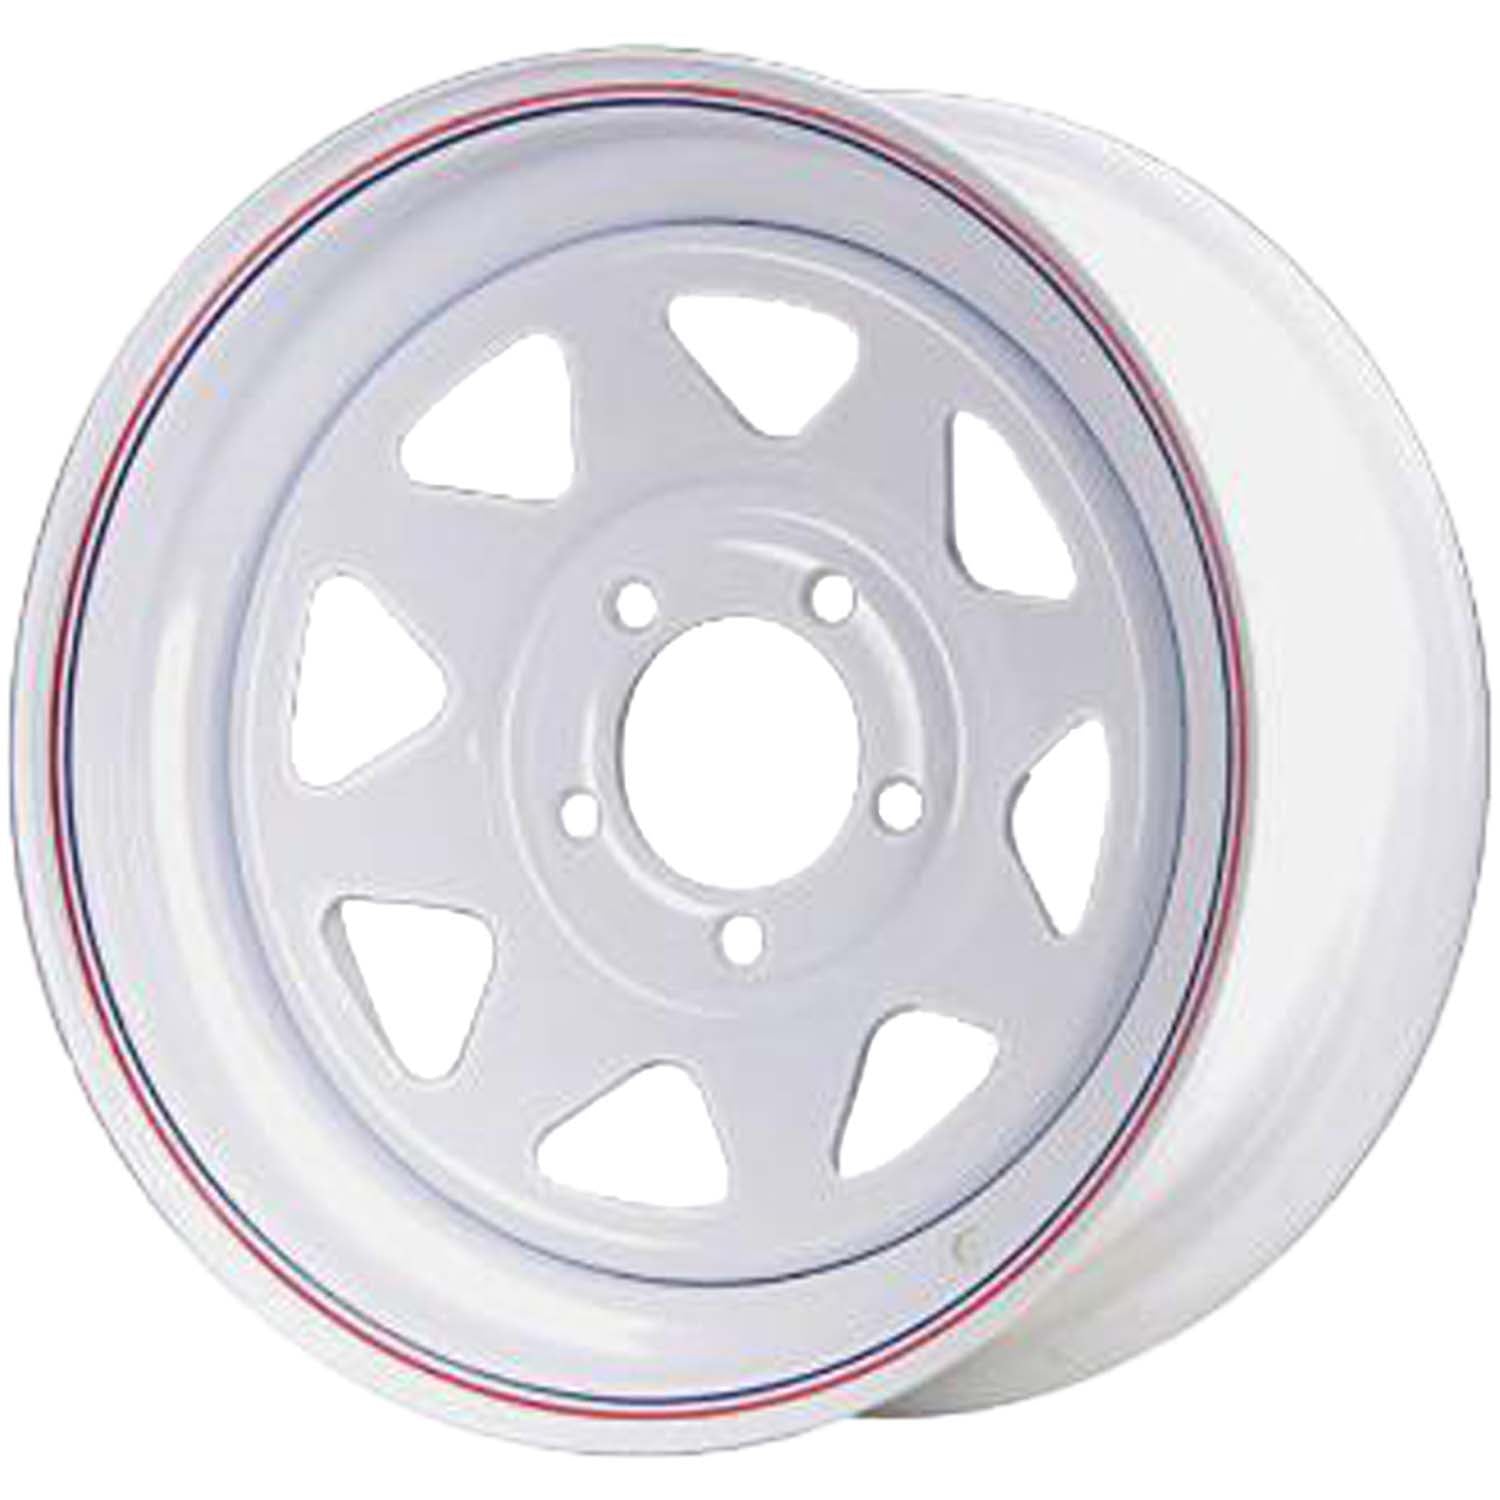 15x6 5 On 4.5 Spoked Steel Trailer Wheel - White with Pin Stripes